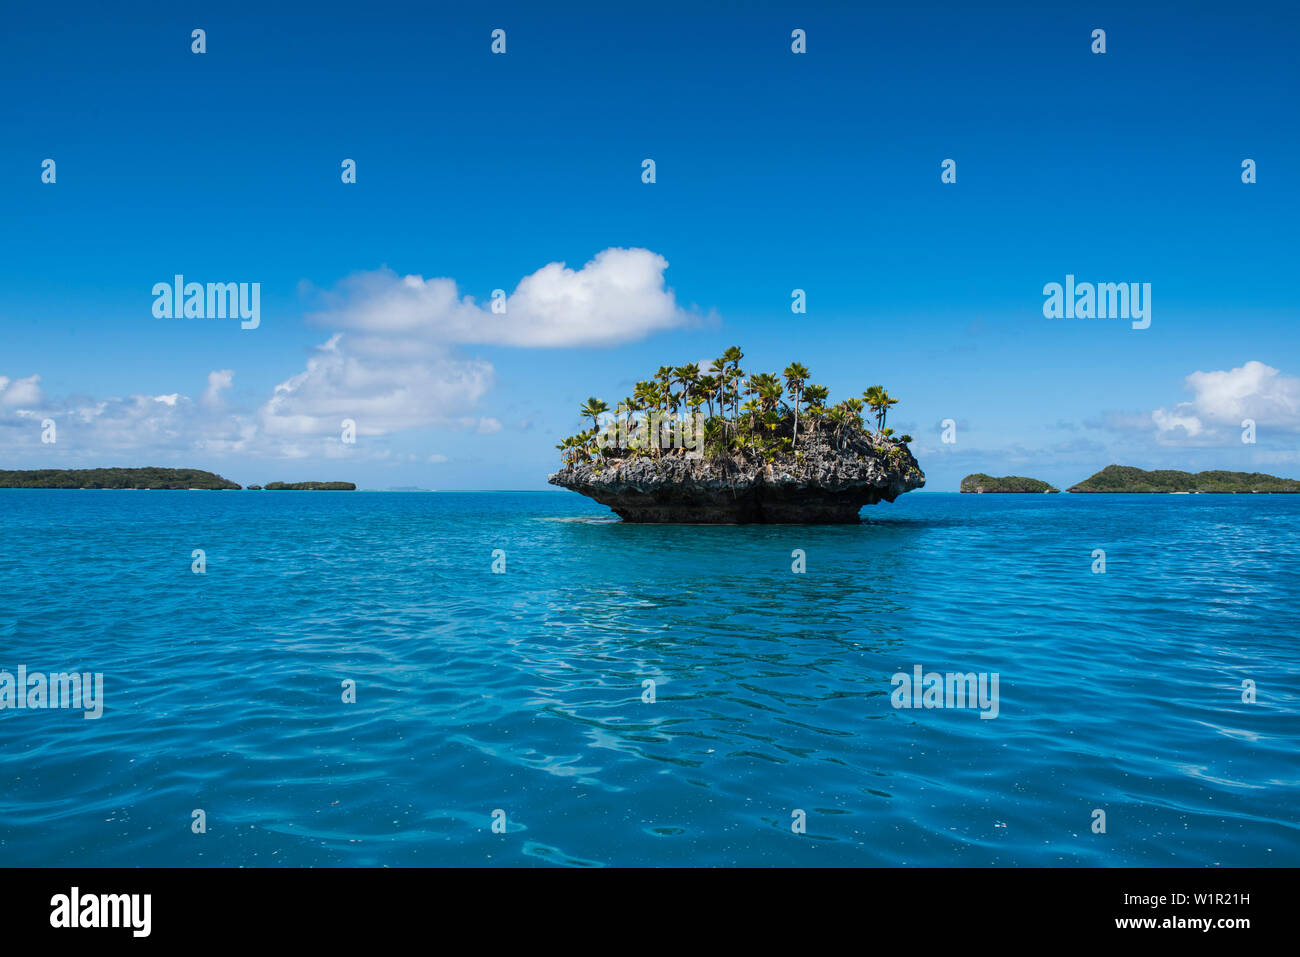 A tiny mushroom-shaped island covered with palm trees and bushes stands in turquoise waters, Fulaga Island, Lau Group, Fiji, South Pacific Stock Photo